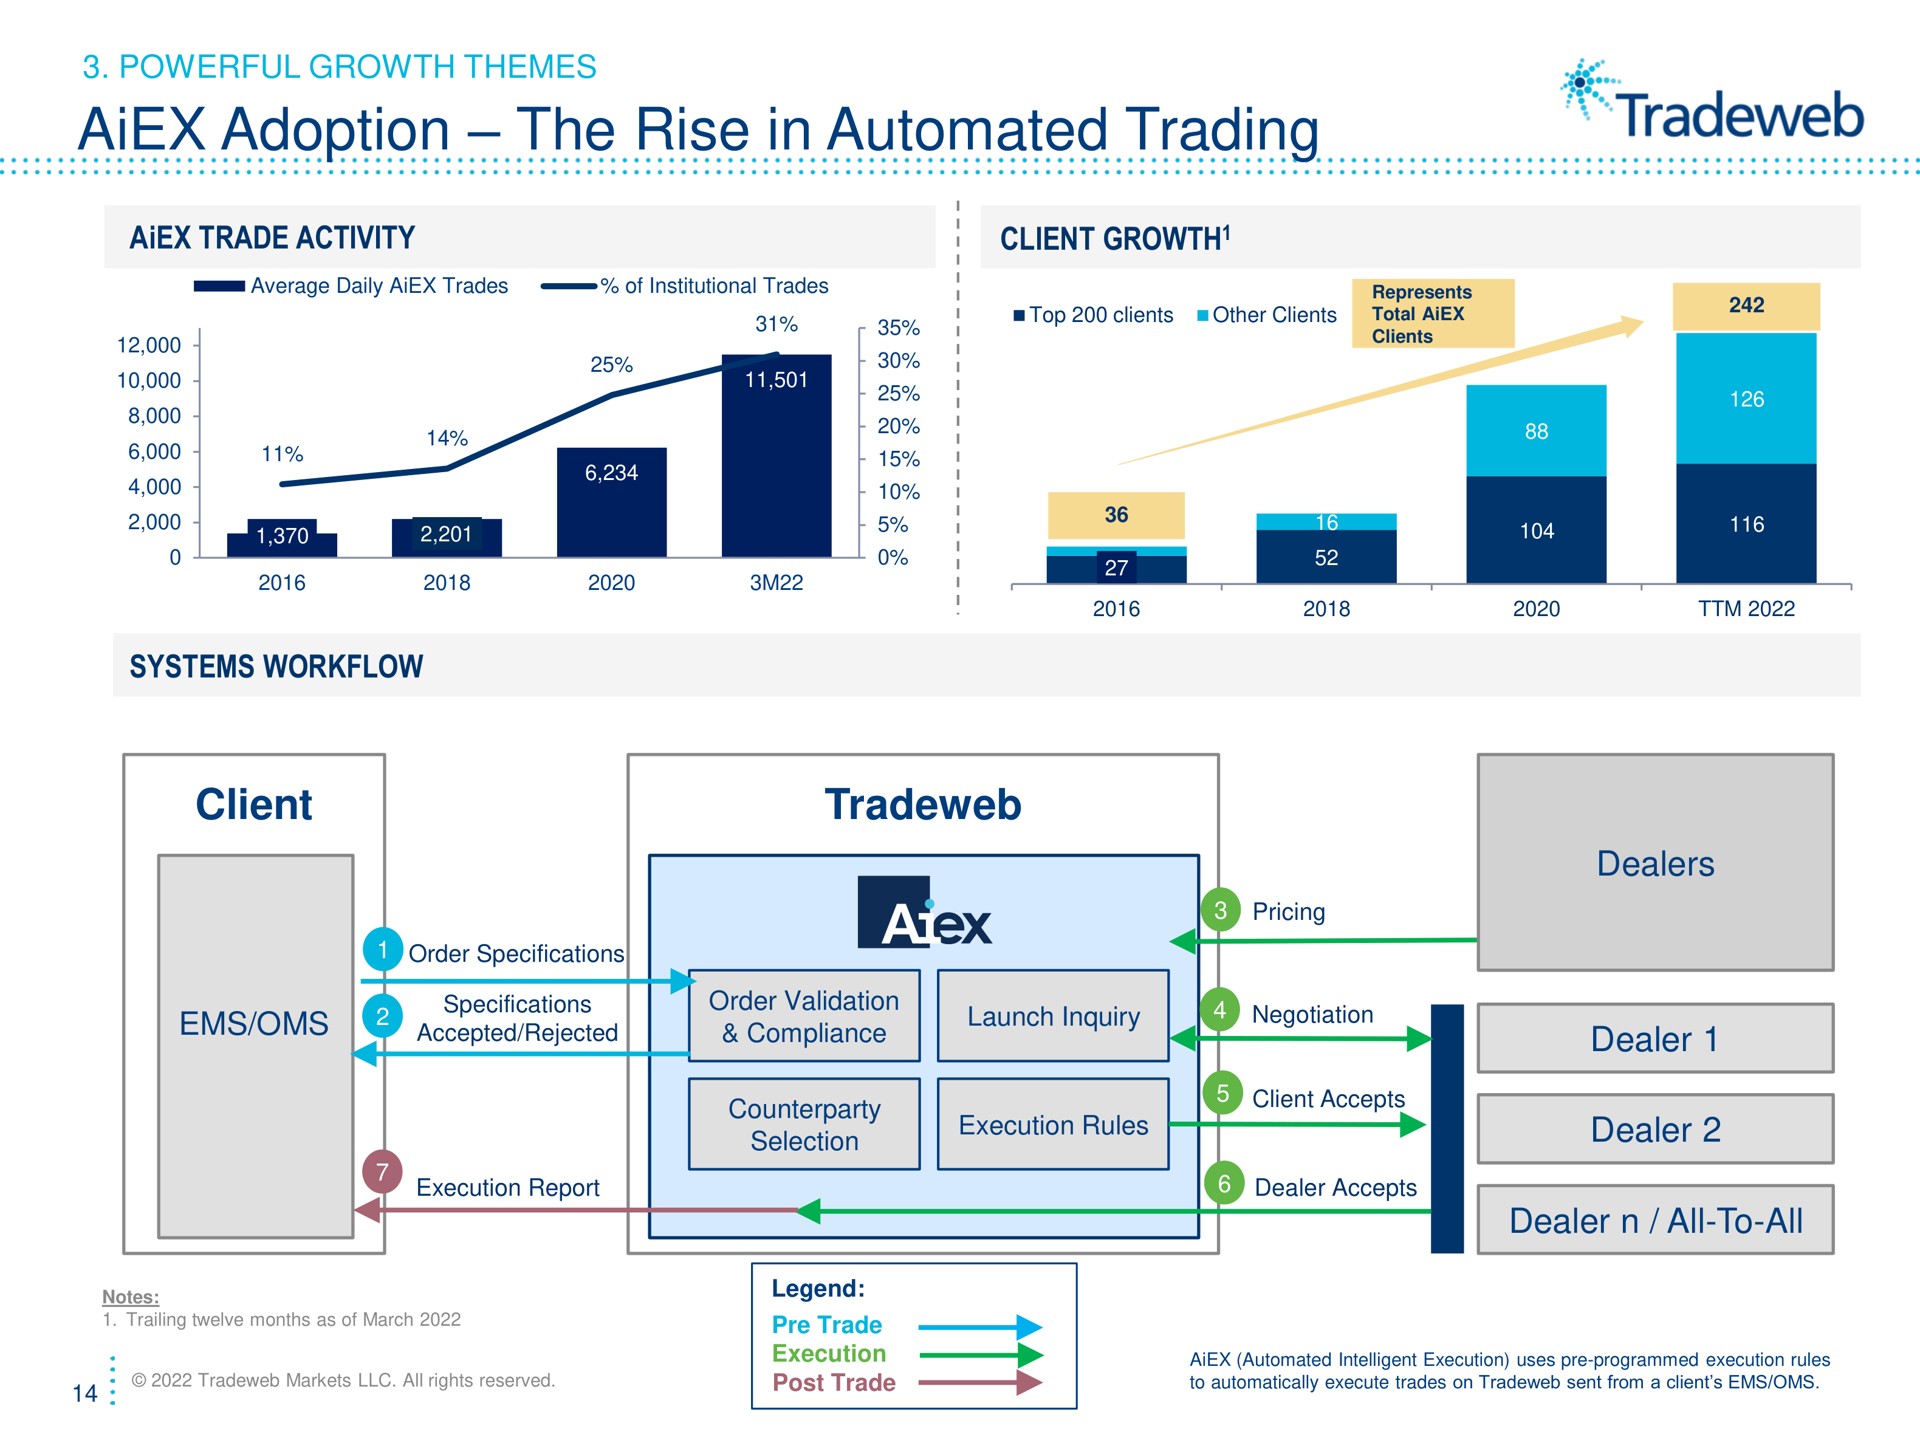 adoption the rise in trading client dealers dealer dealer dealer all to all powerful growth themes trade activity a systems growth | Tradeweb